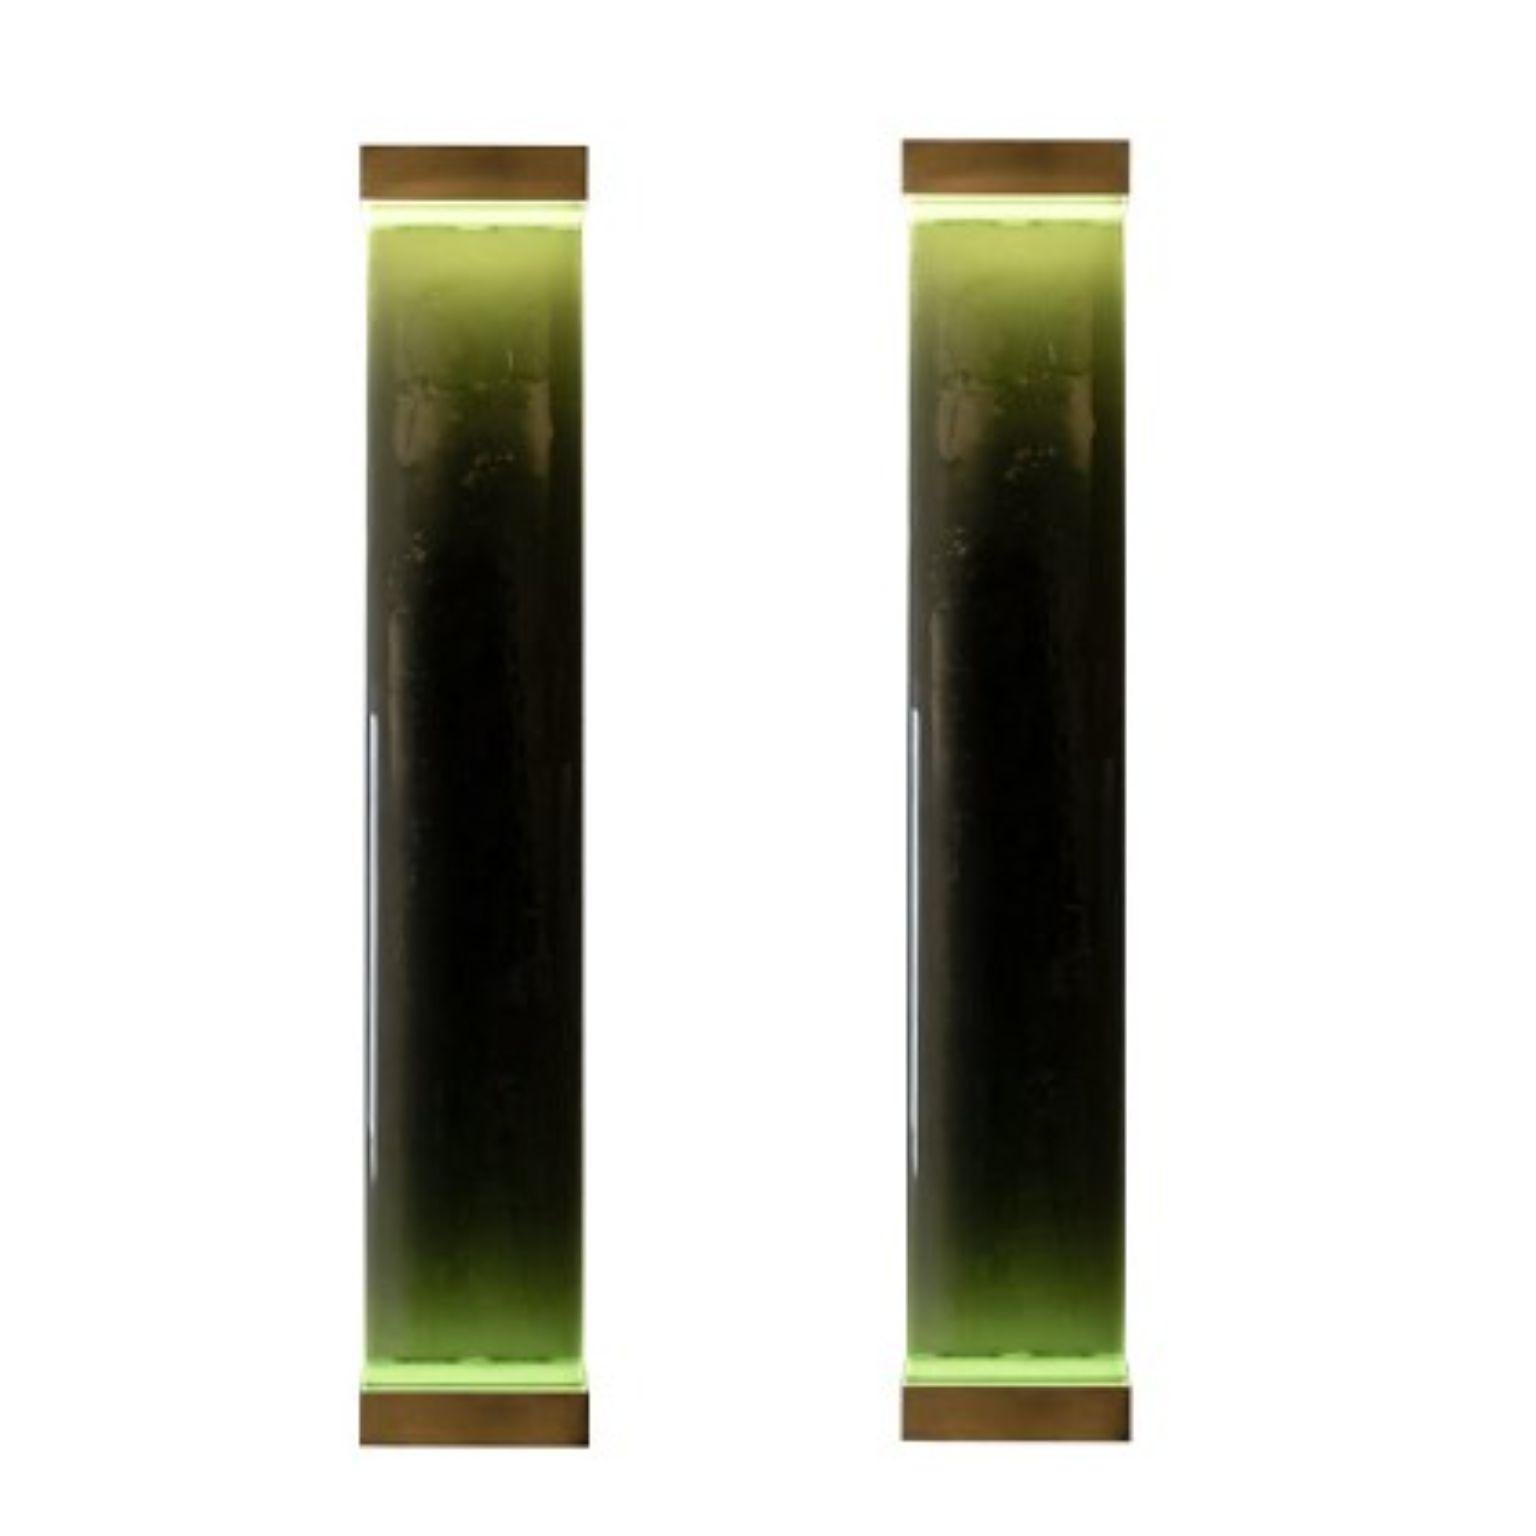 Set of 2 Jud wall lamps by Draga & Aurel
Dimensions: W 23, D 10, H 131
Materials: Resin and brass

All our lamps can be wired according to each country. If sold to the USA it will be wired for the USA for instance.

Inspired by minimalism, the